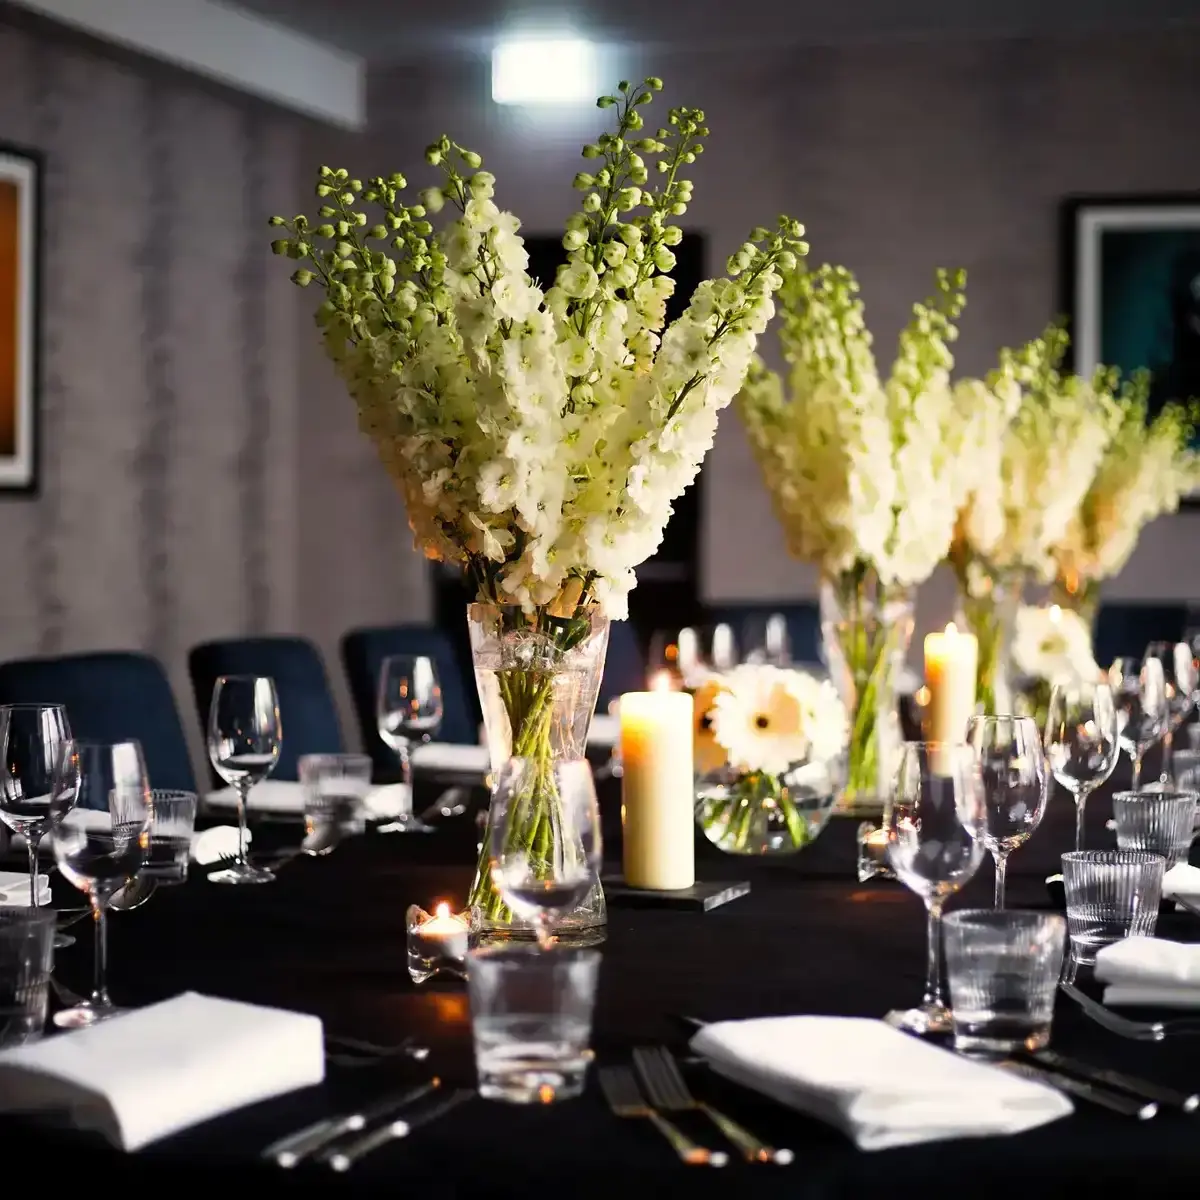 Malmaison Birmingham Private Dining Table set for a formal dinner with candles and flowers.